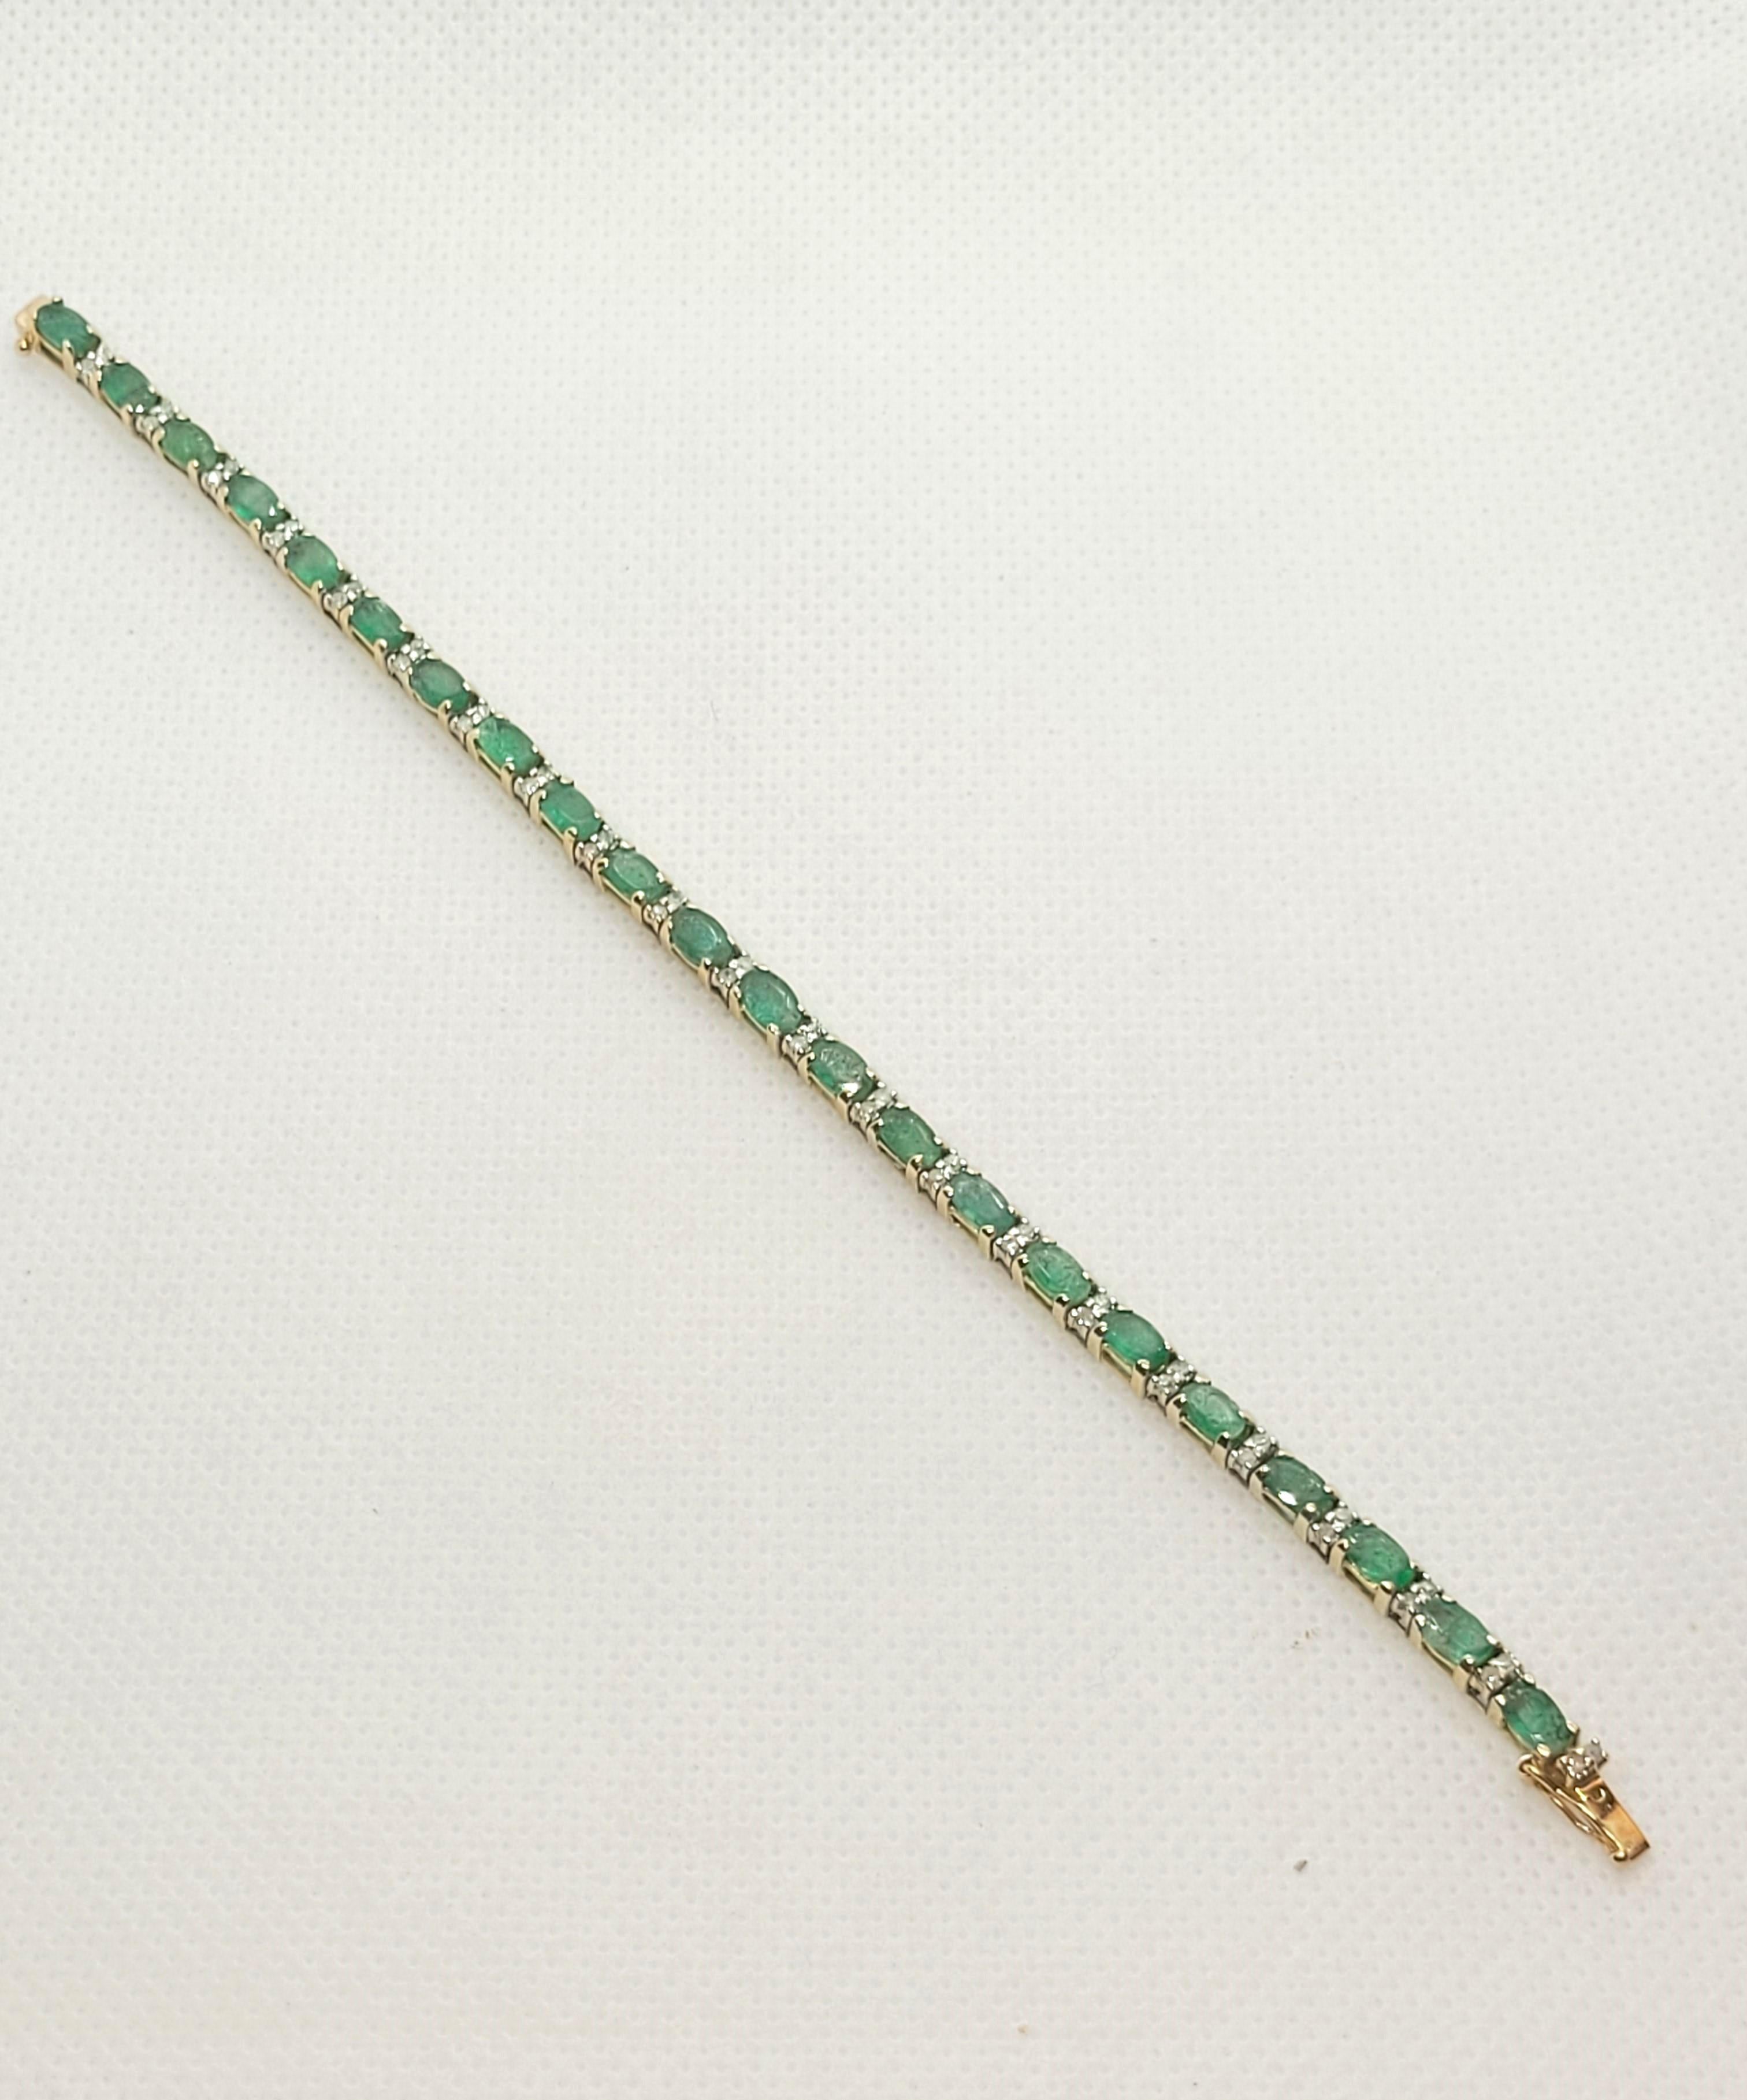 Lovely 14kt yellow gold emerald and diamond tennis bracelet of 6.25 inches in length. The 22 emeralds are oblong oval shaped at approximately .80cttw and the 44 round single-cut diamonds are at approximately .45cdttw. The diamond and emera4.8ld